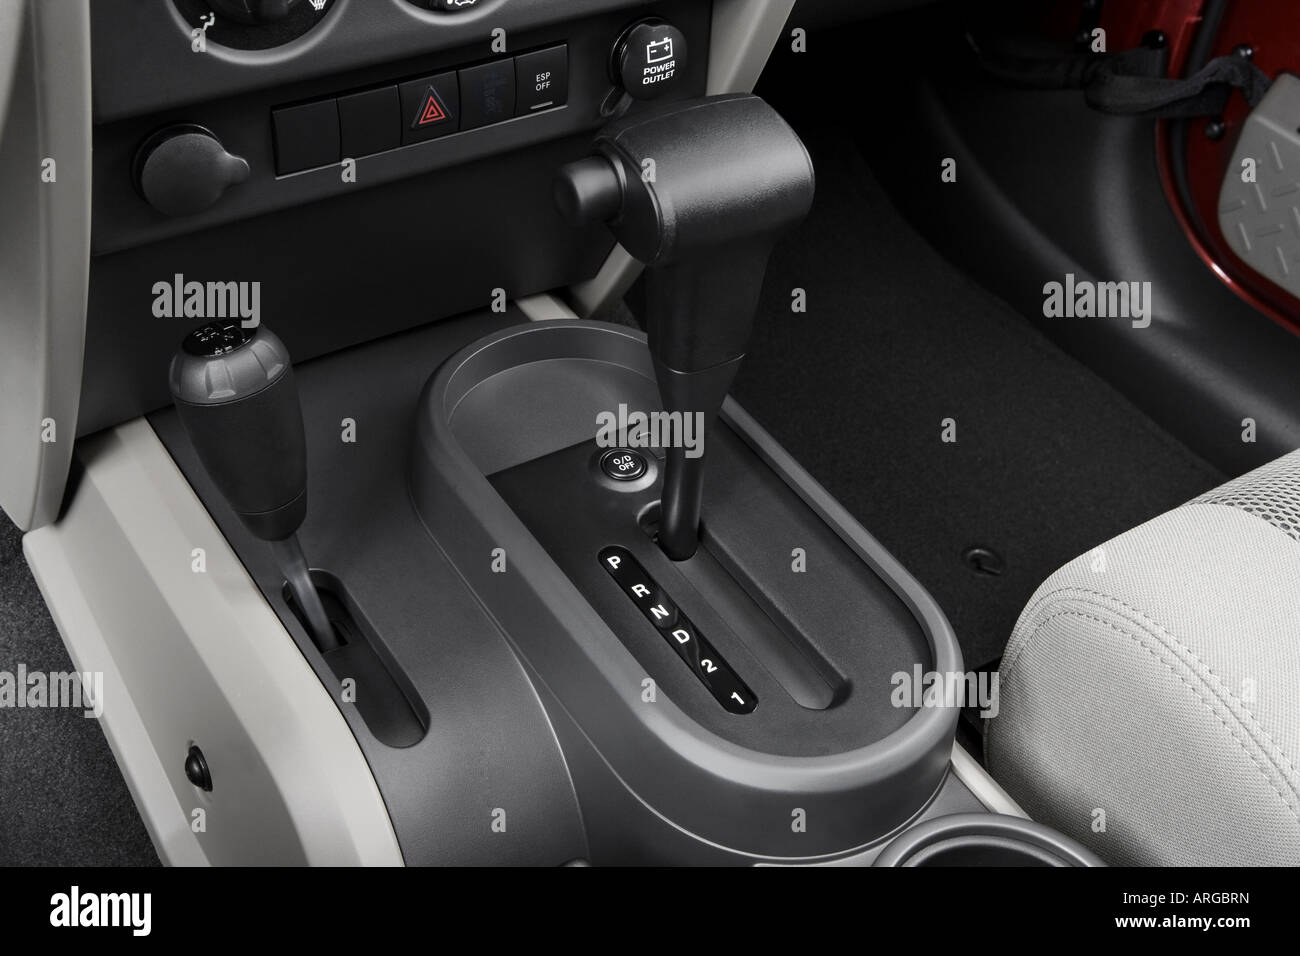 2007 Jeep Wrangler Sahara in Red - Gear shifter/center console Stock Photo  - Alamy